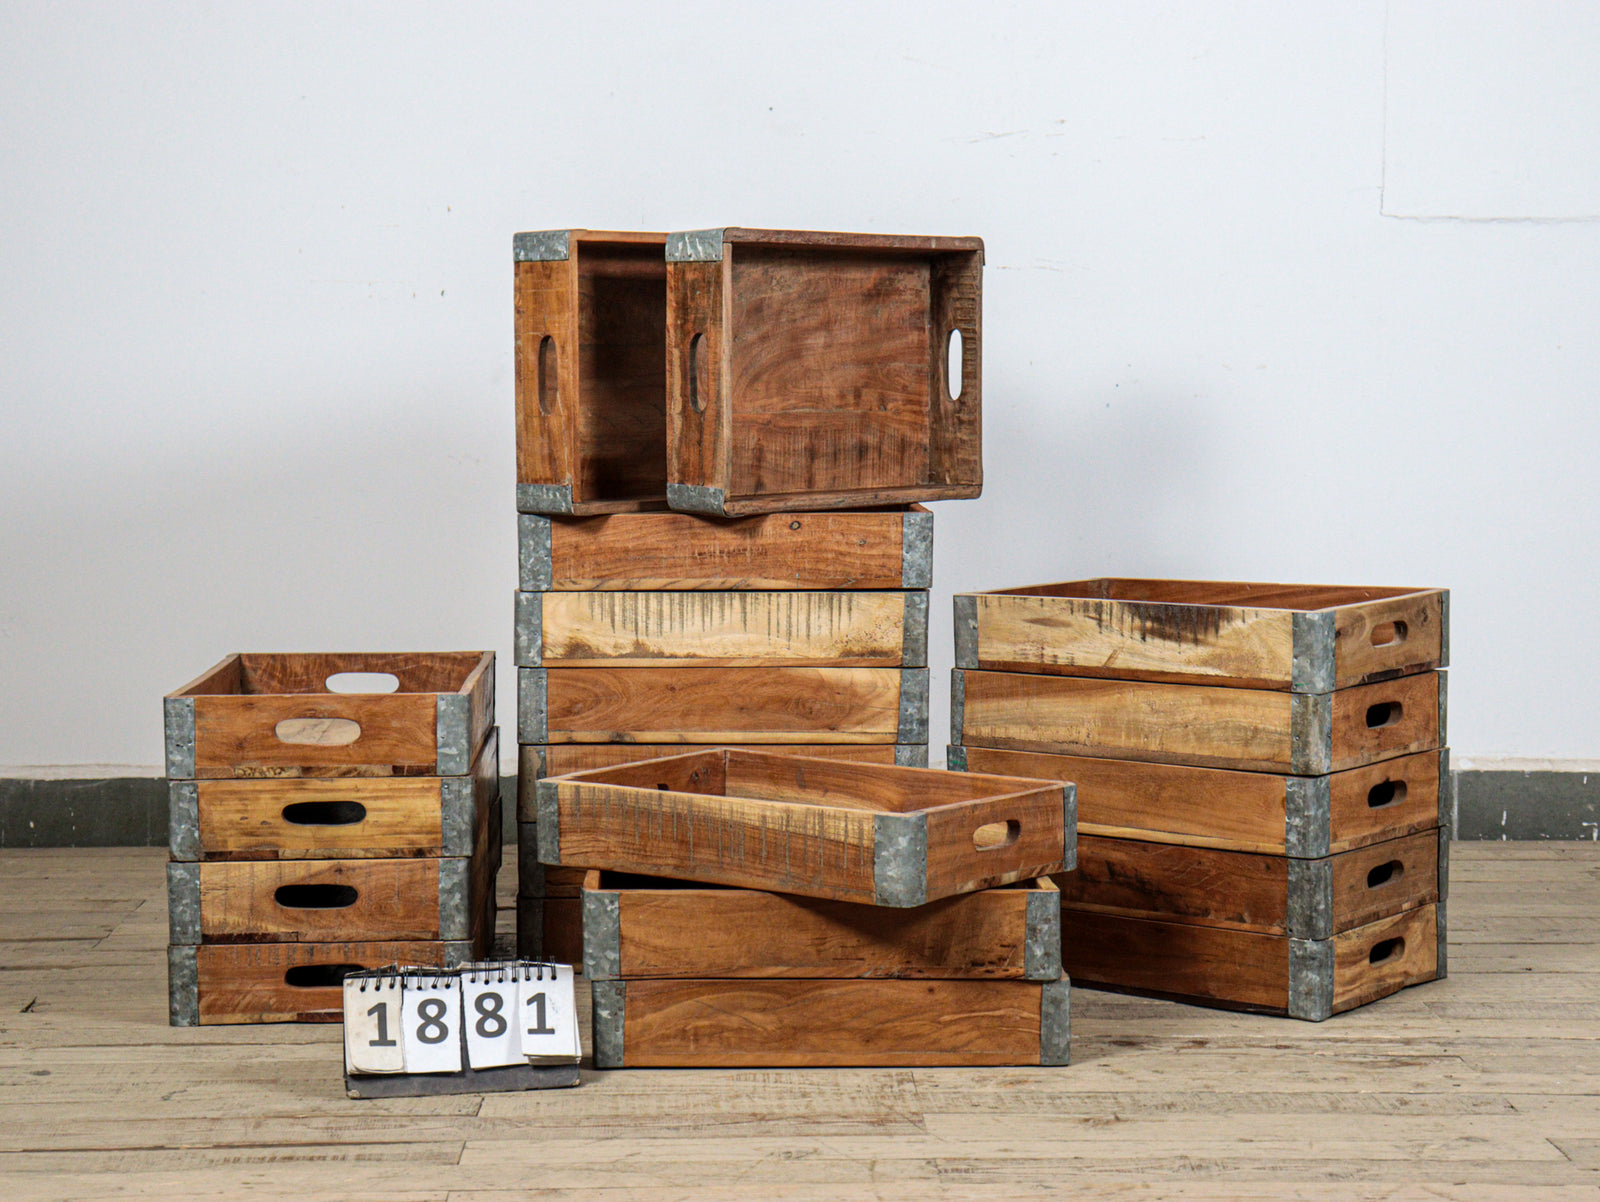 MILL-1881 Wooden Crate C23